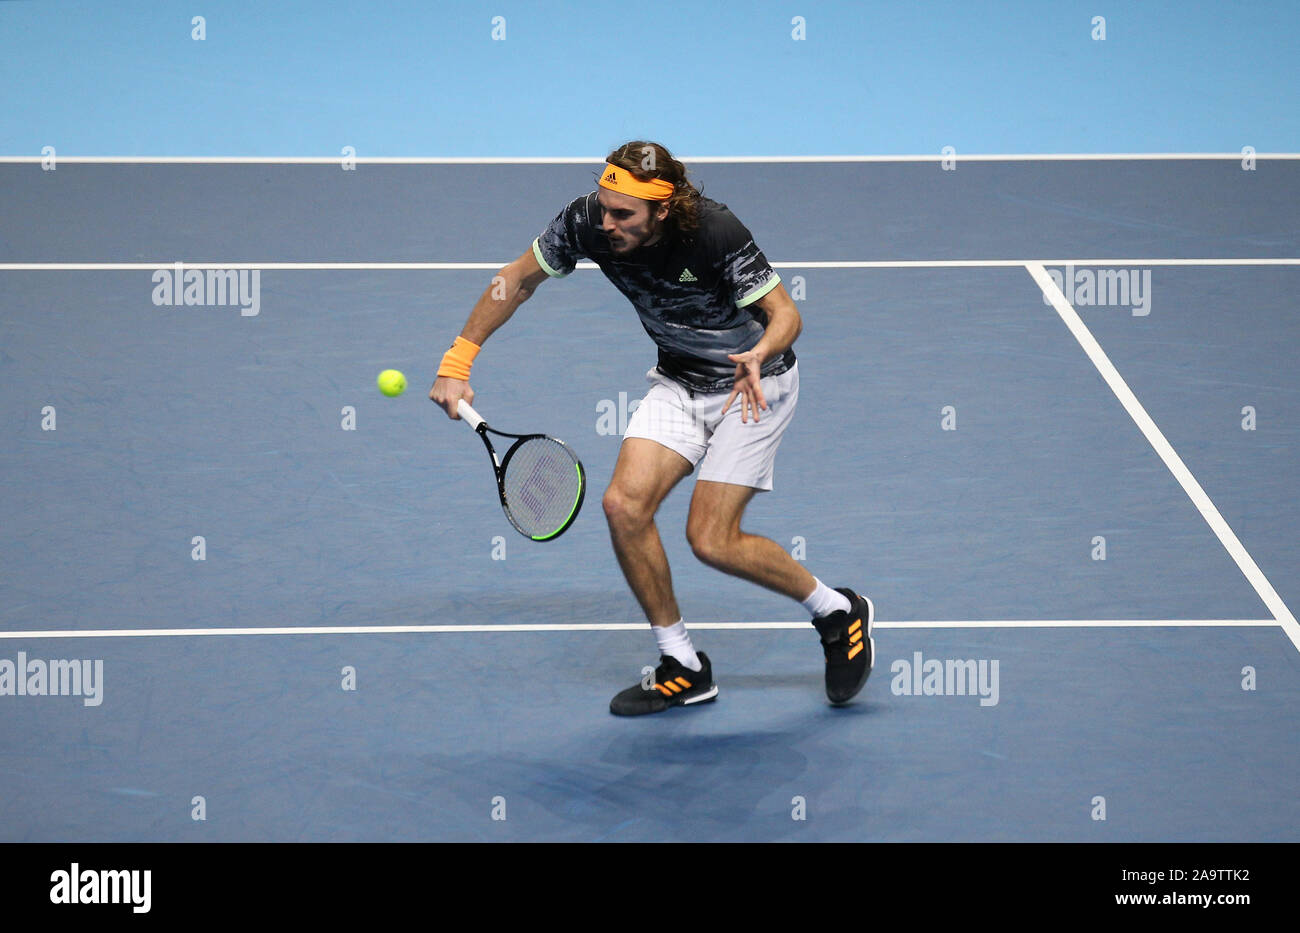 17th November 2019; O2 Arena, London, England; Nitto ATP Tennis Finals;  Stefanos Tsitsipas (GRE) plays a backhand shot in his singles final match  against Dominic Thiem (AUT) - Editorial Use Stock Photo - Alamy